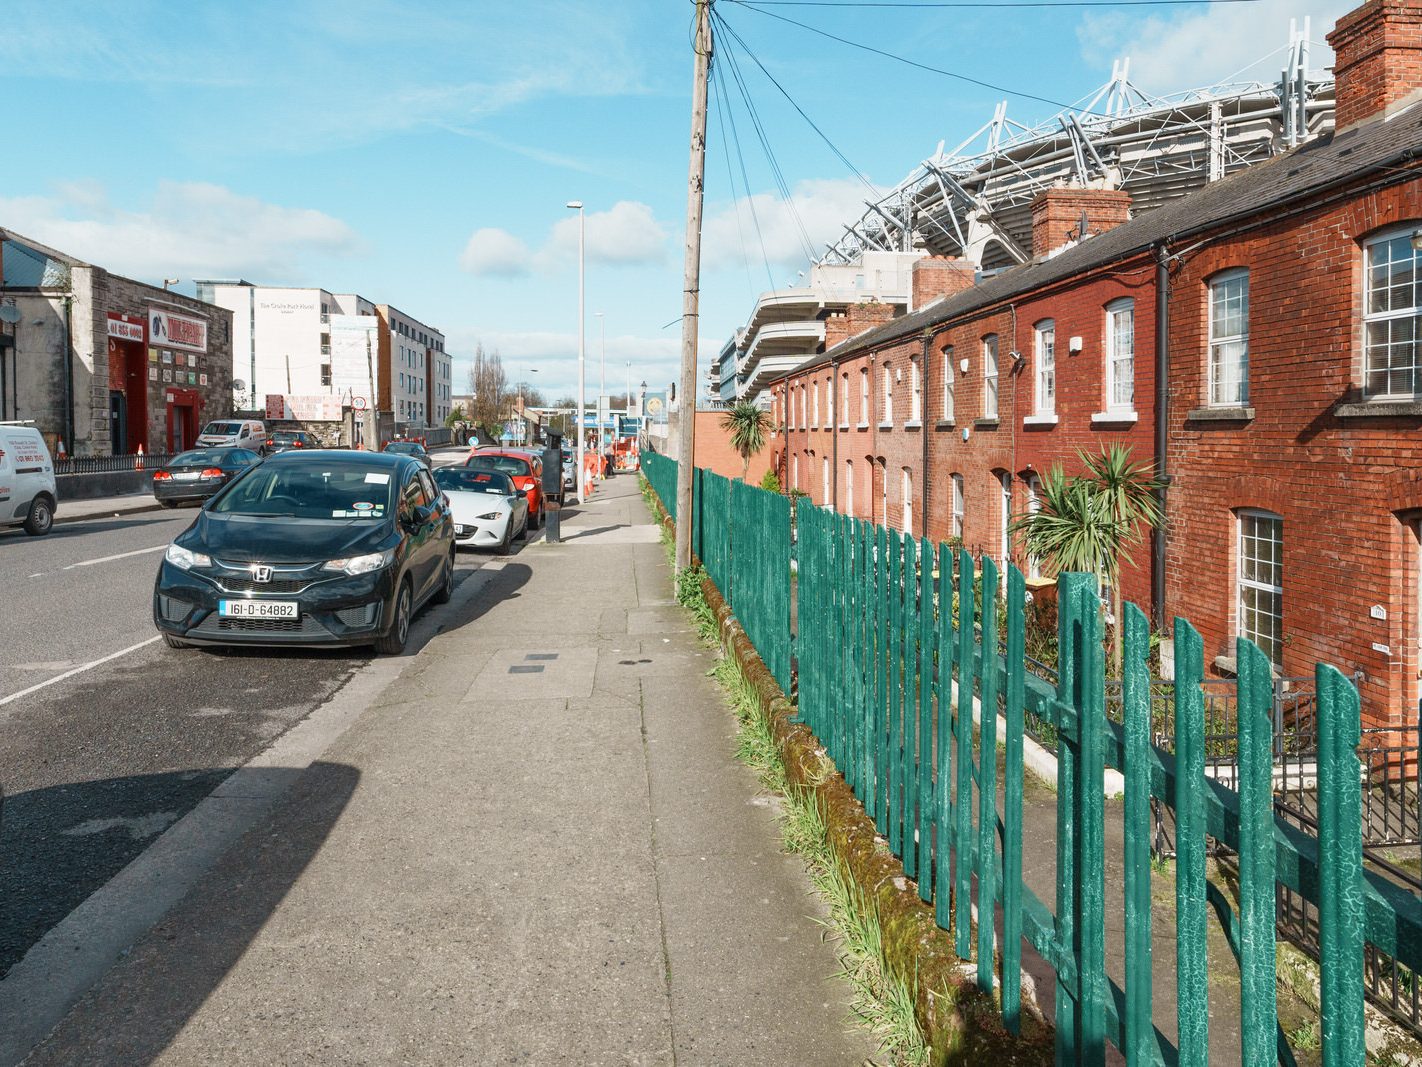 RUSSELL STREET CONNECTING THE NORTH CIRCULAR ROAD TO CLONLIFFE ROAD [VIA JONES' ROAD]-229712-1